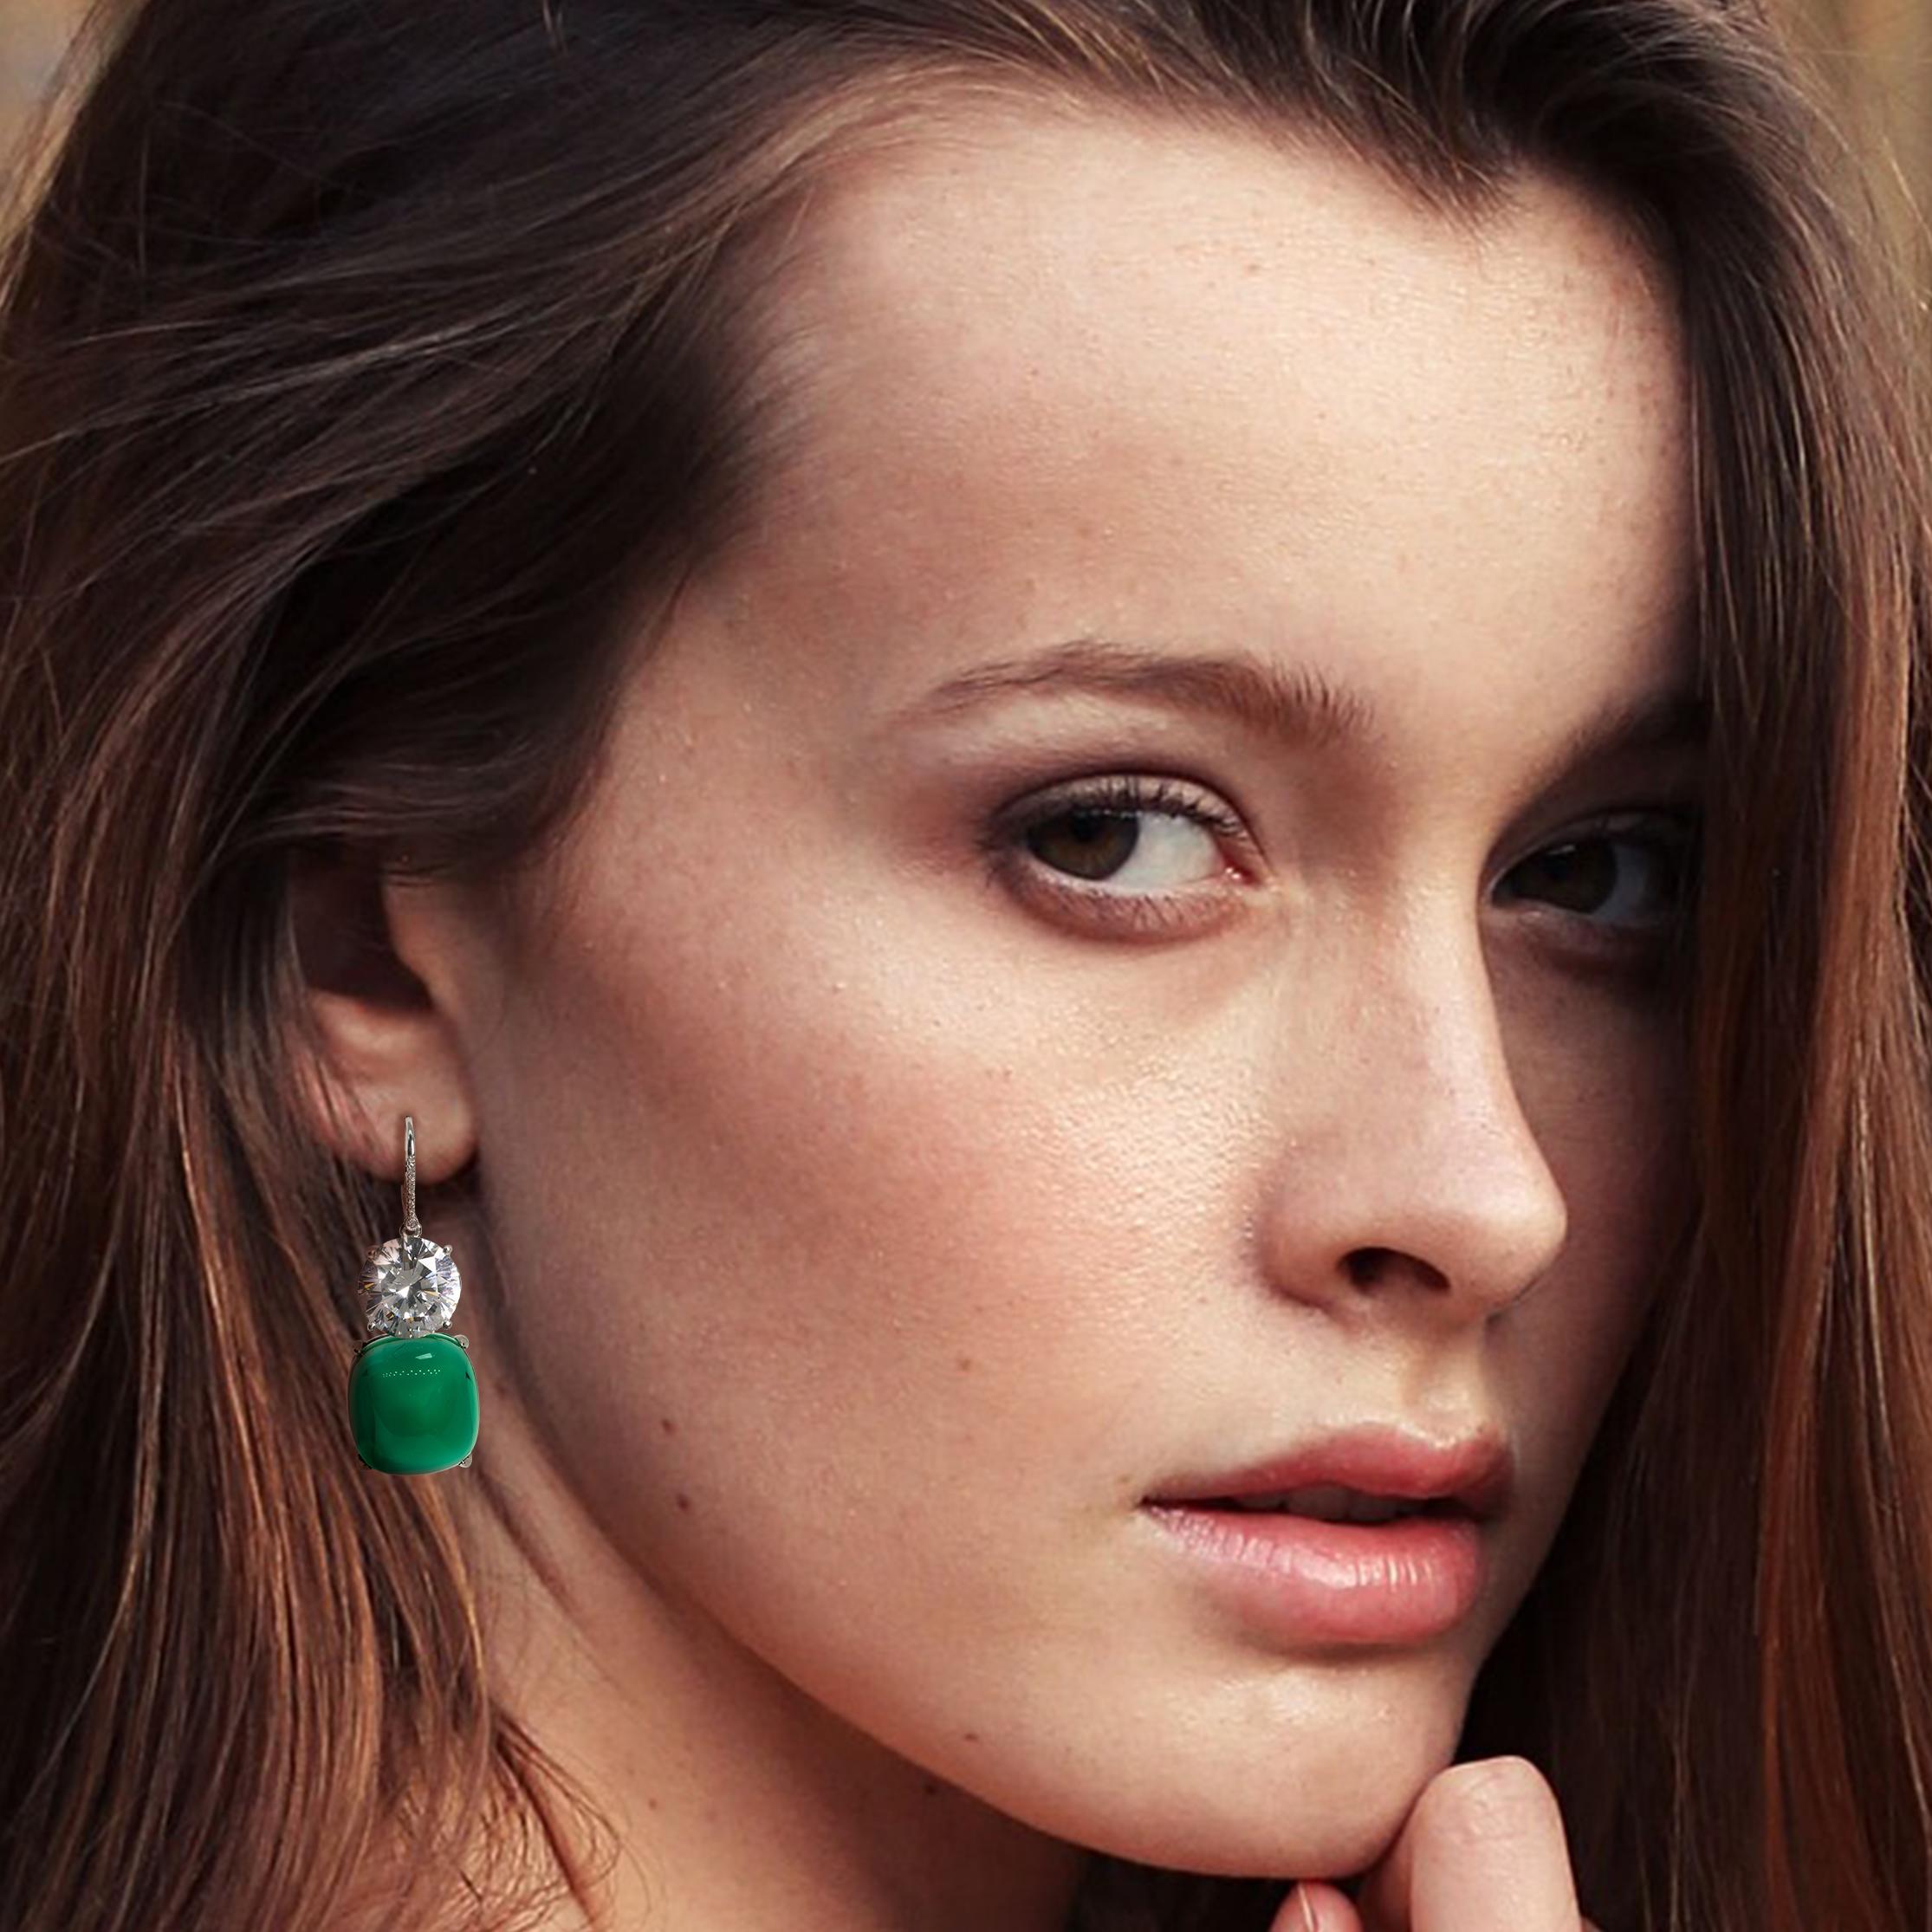 Lab Created Diamond Costume Jewelry Large Cabochon Emerald Earrings

Our stunning faux large cabochon emerald and large round diamond CZ with genuine tiny diamond set-tops are the most breathtaking Red Carpet look in the classic estate-signed